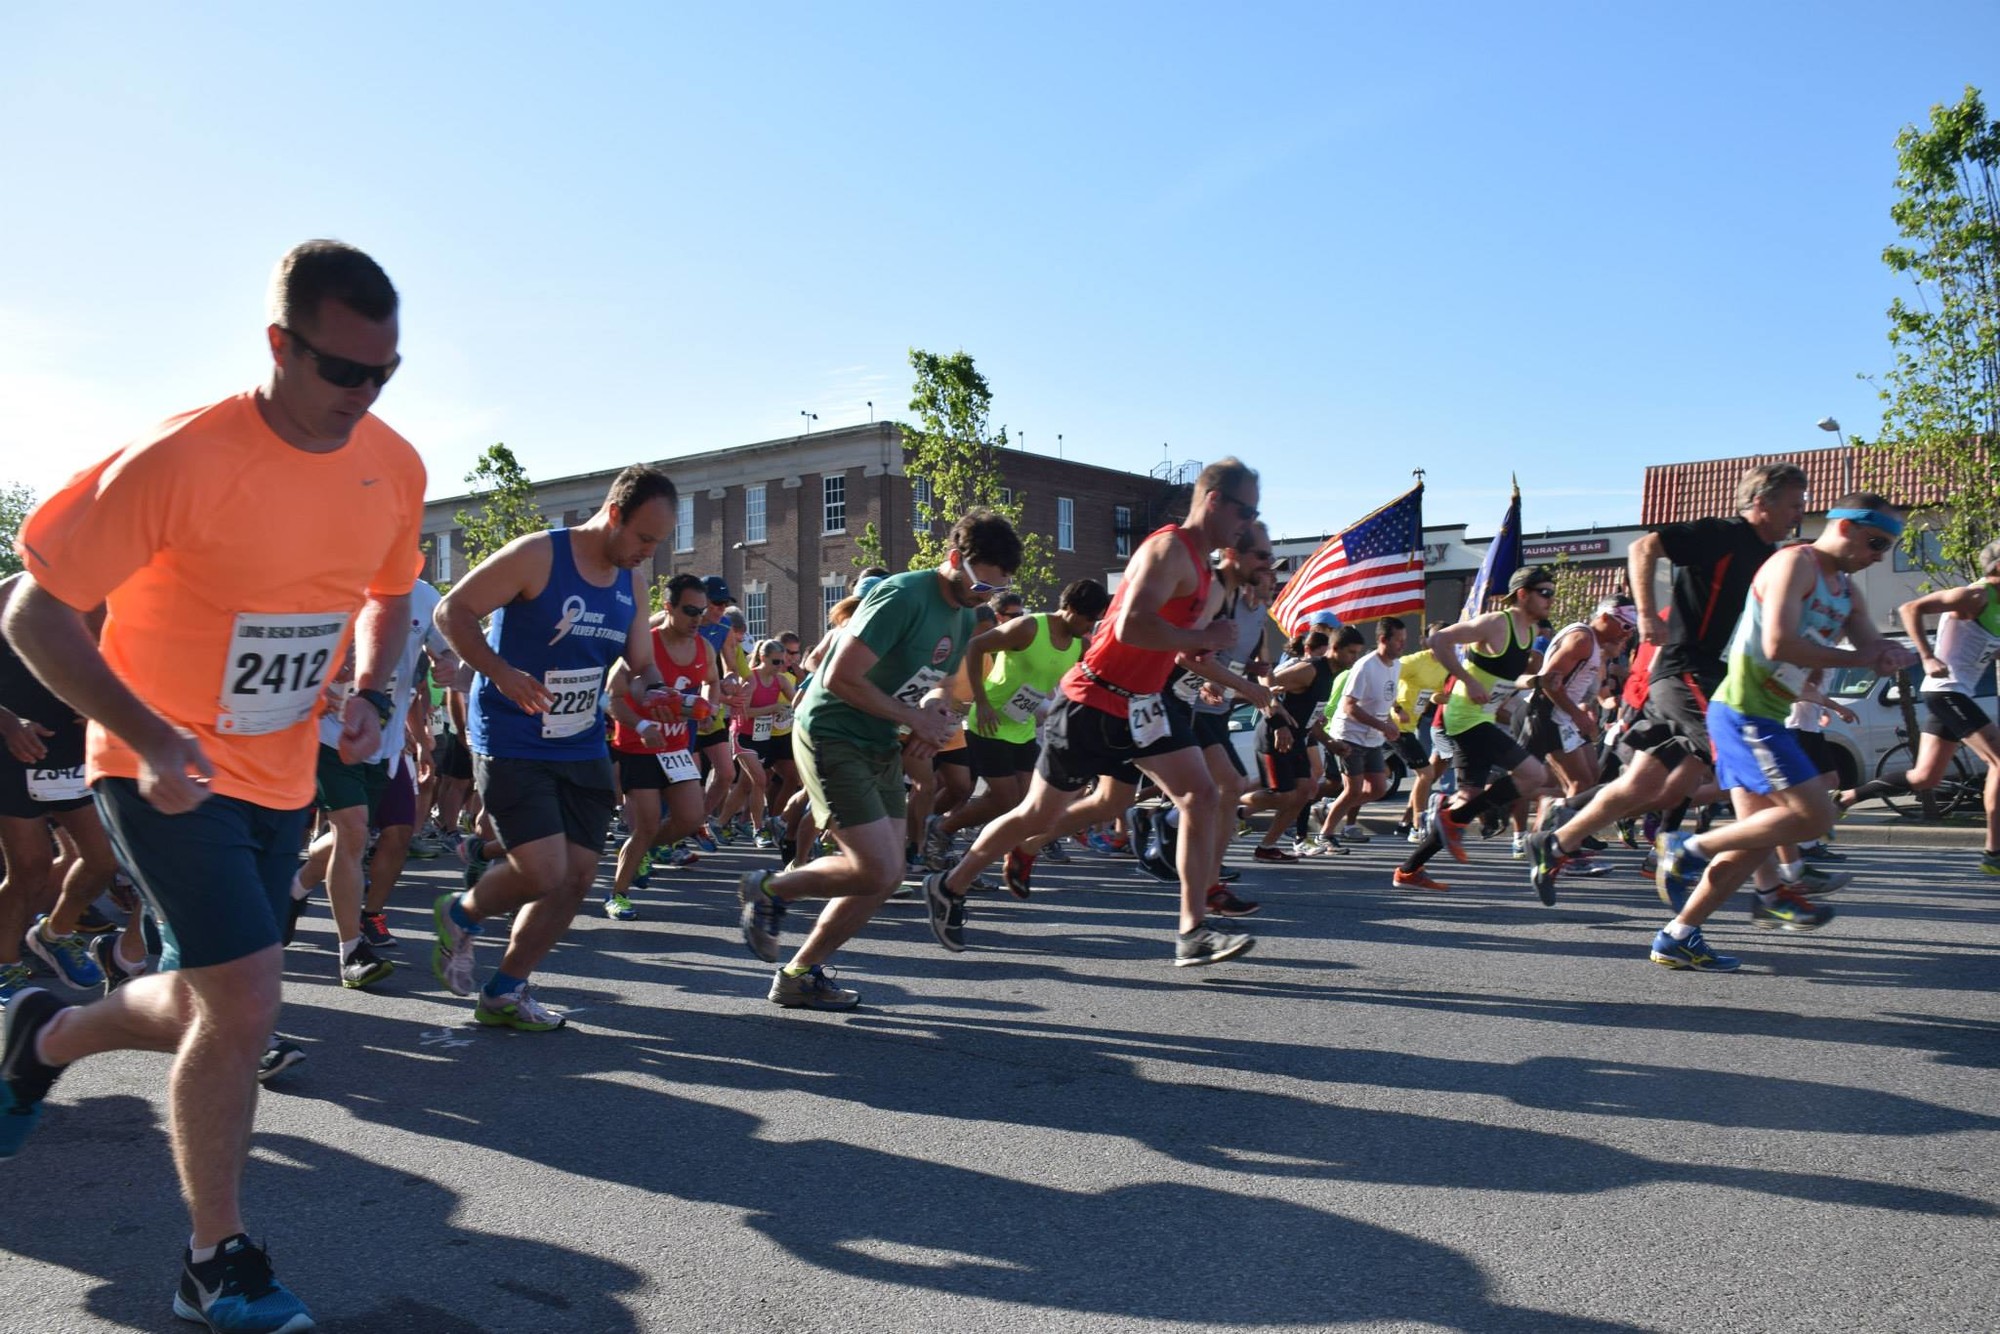 Hundreds tackled the 10-mile race last weekend to honor those that made the ultimate sacrifice for their country.